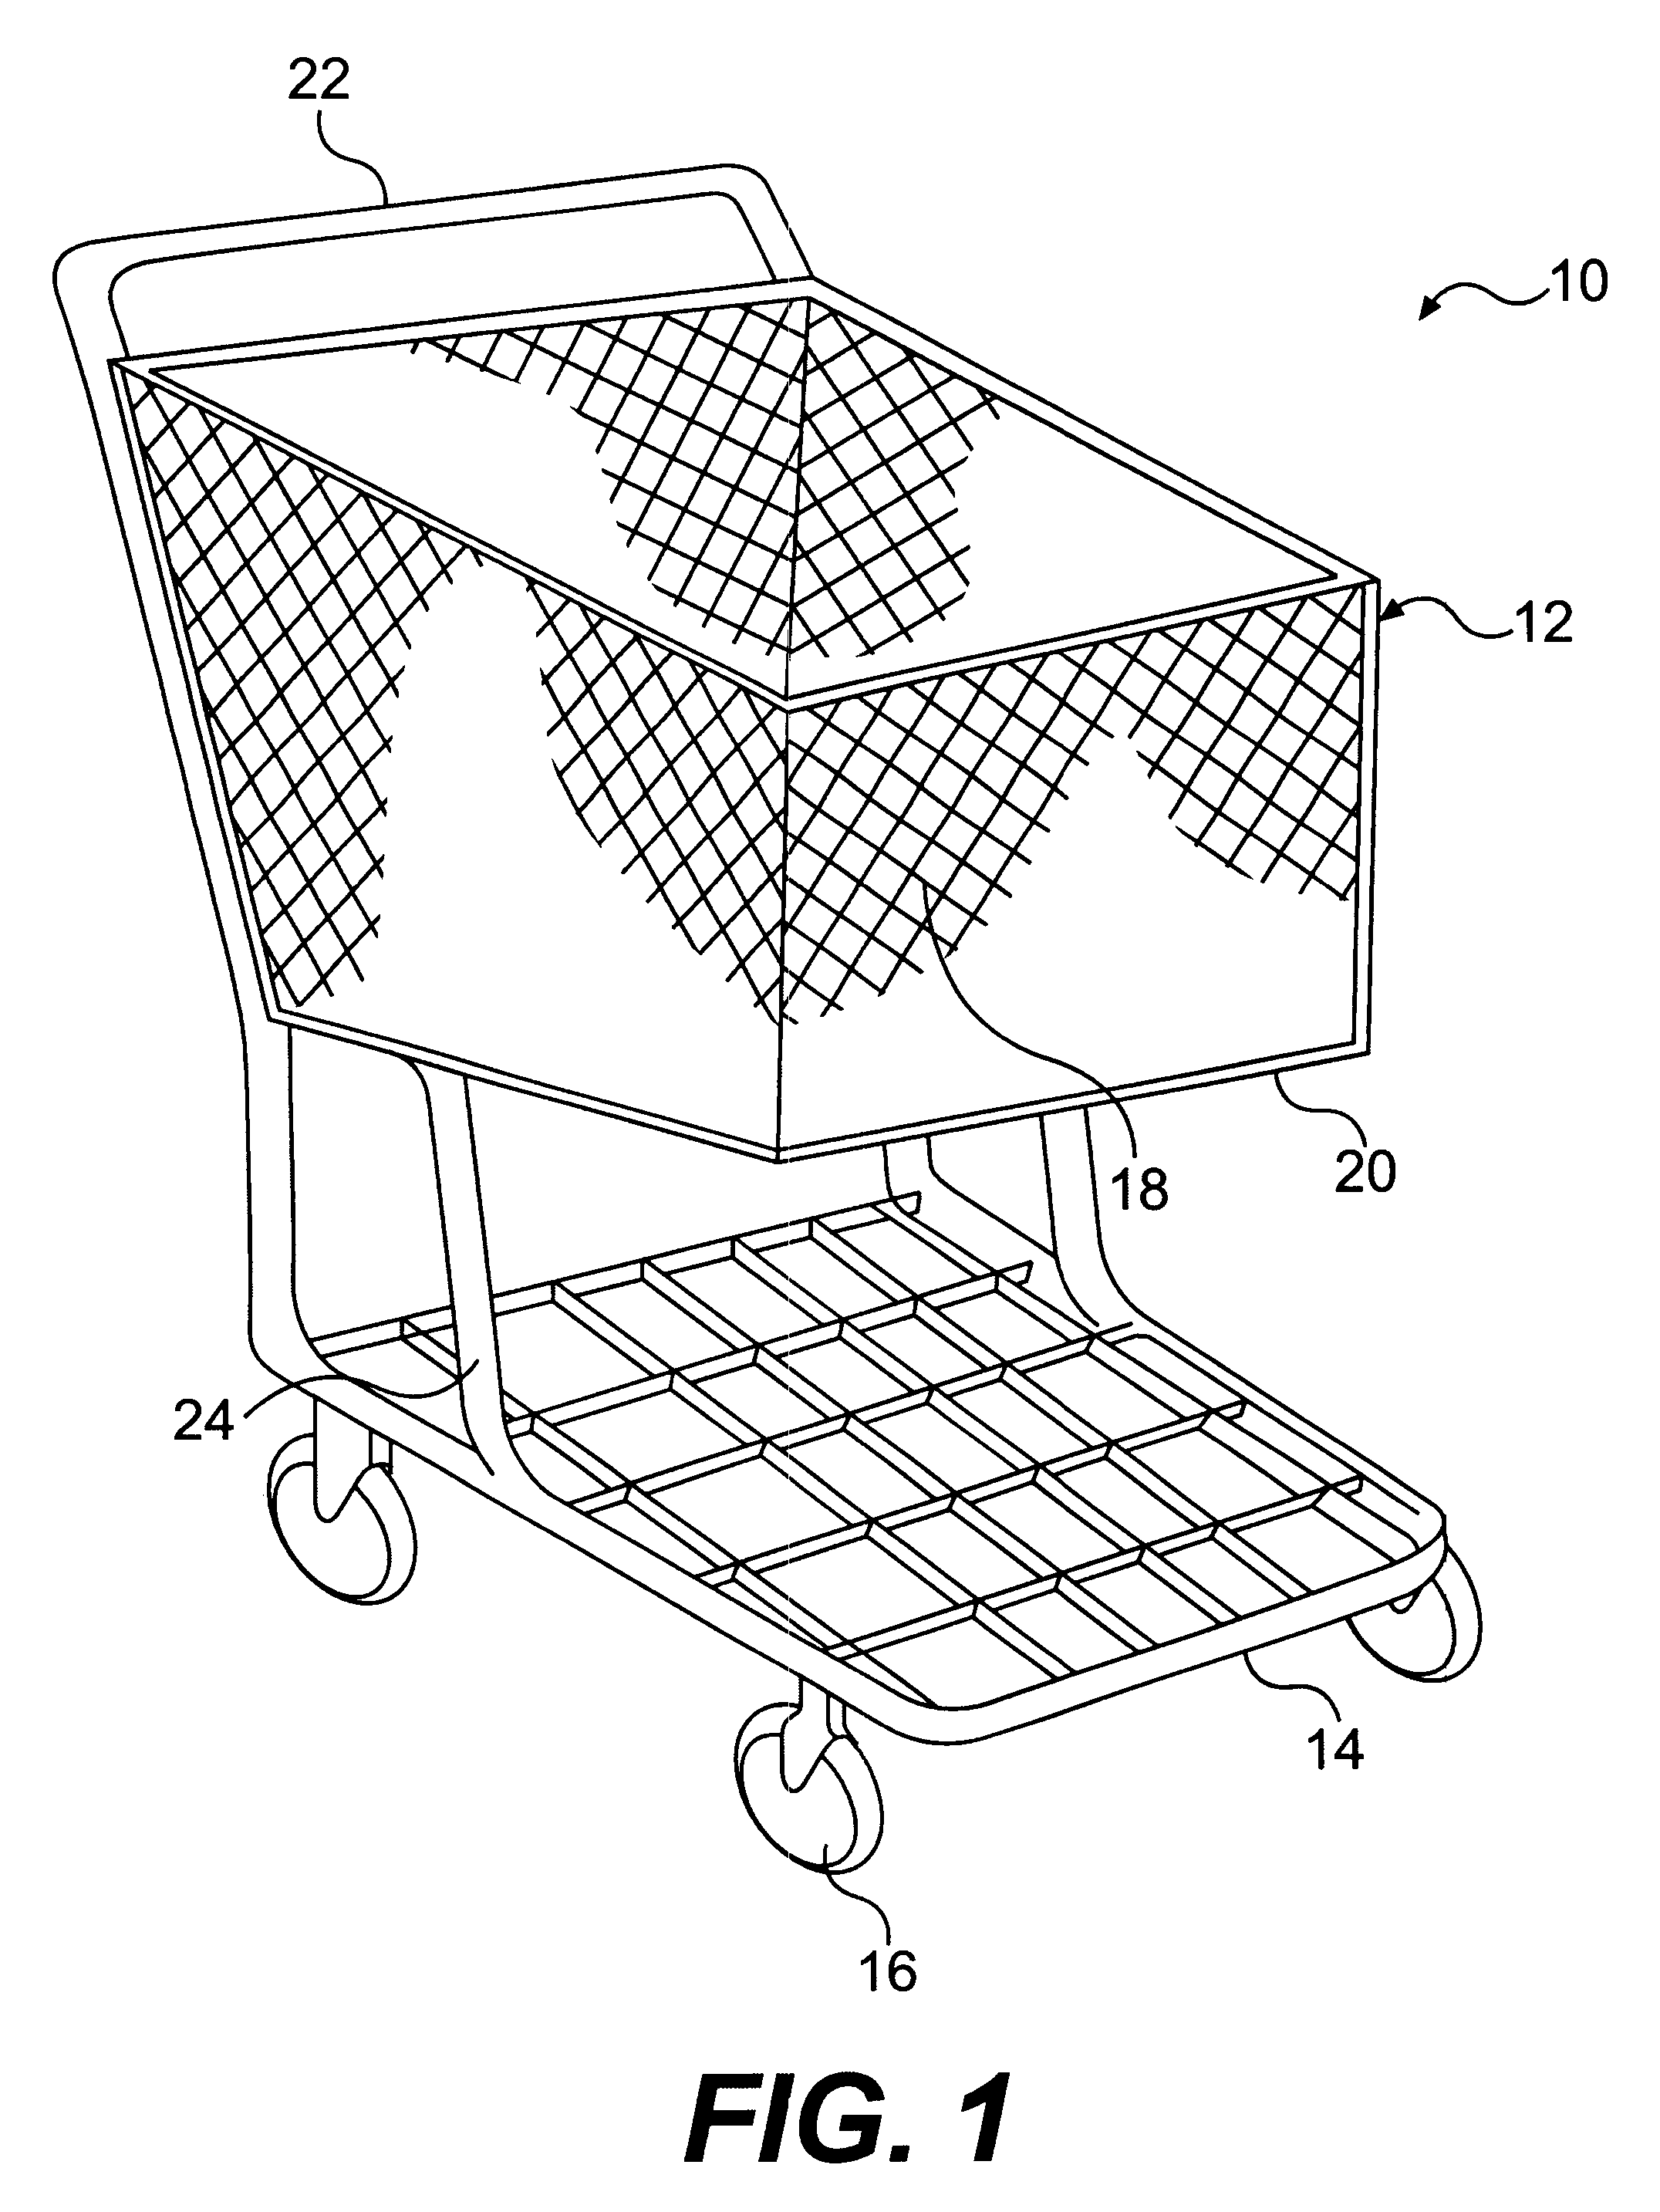 Method of molding a cart using molding processes